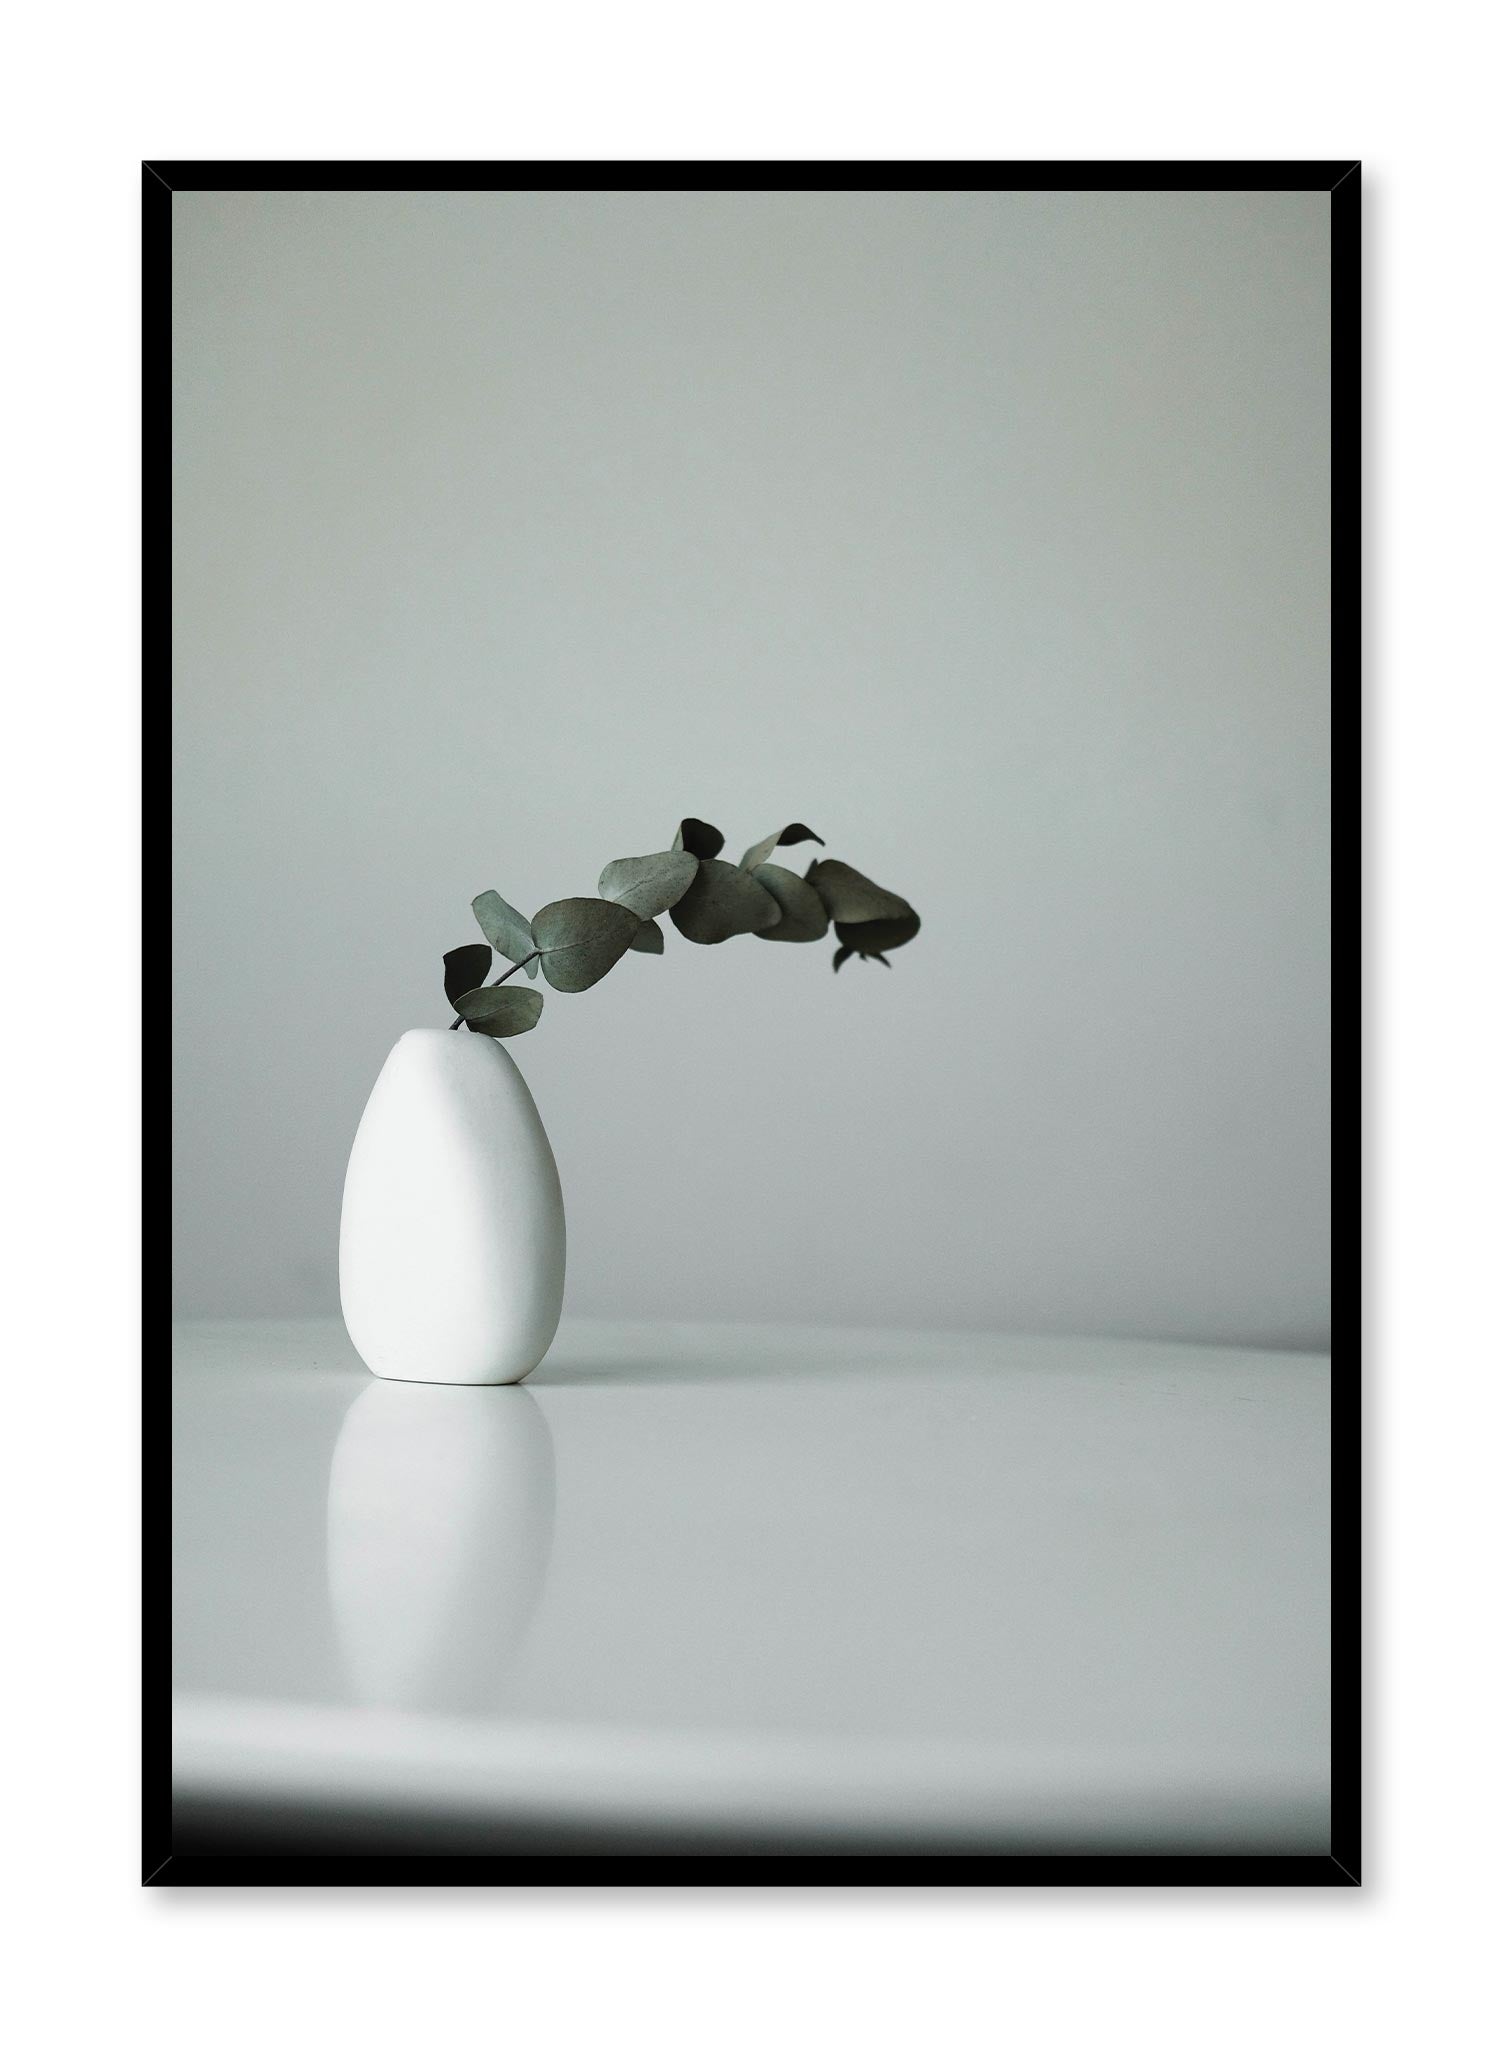 Eucalyptus is a minimalist photography by Opposite Wall of an eucalyptus plant leaning outwards from a small white vase.